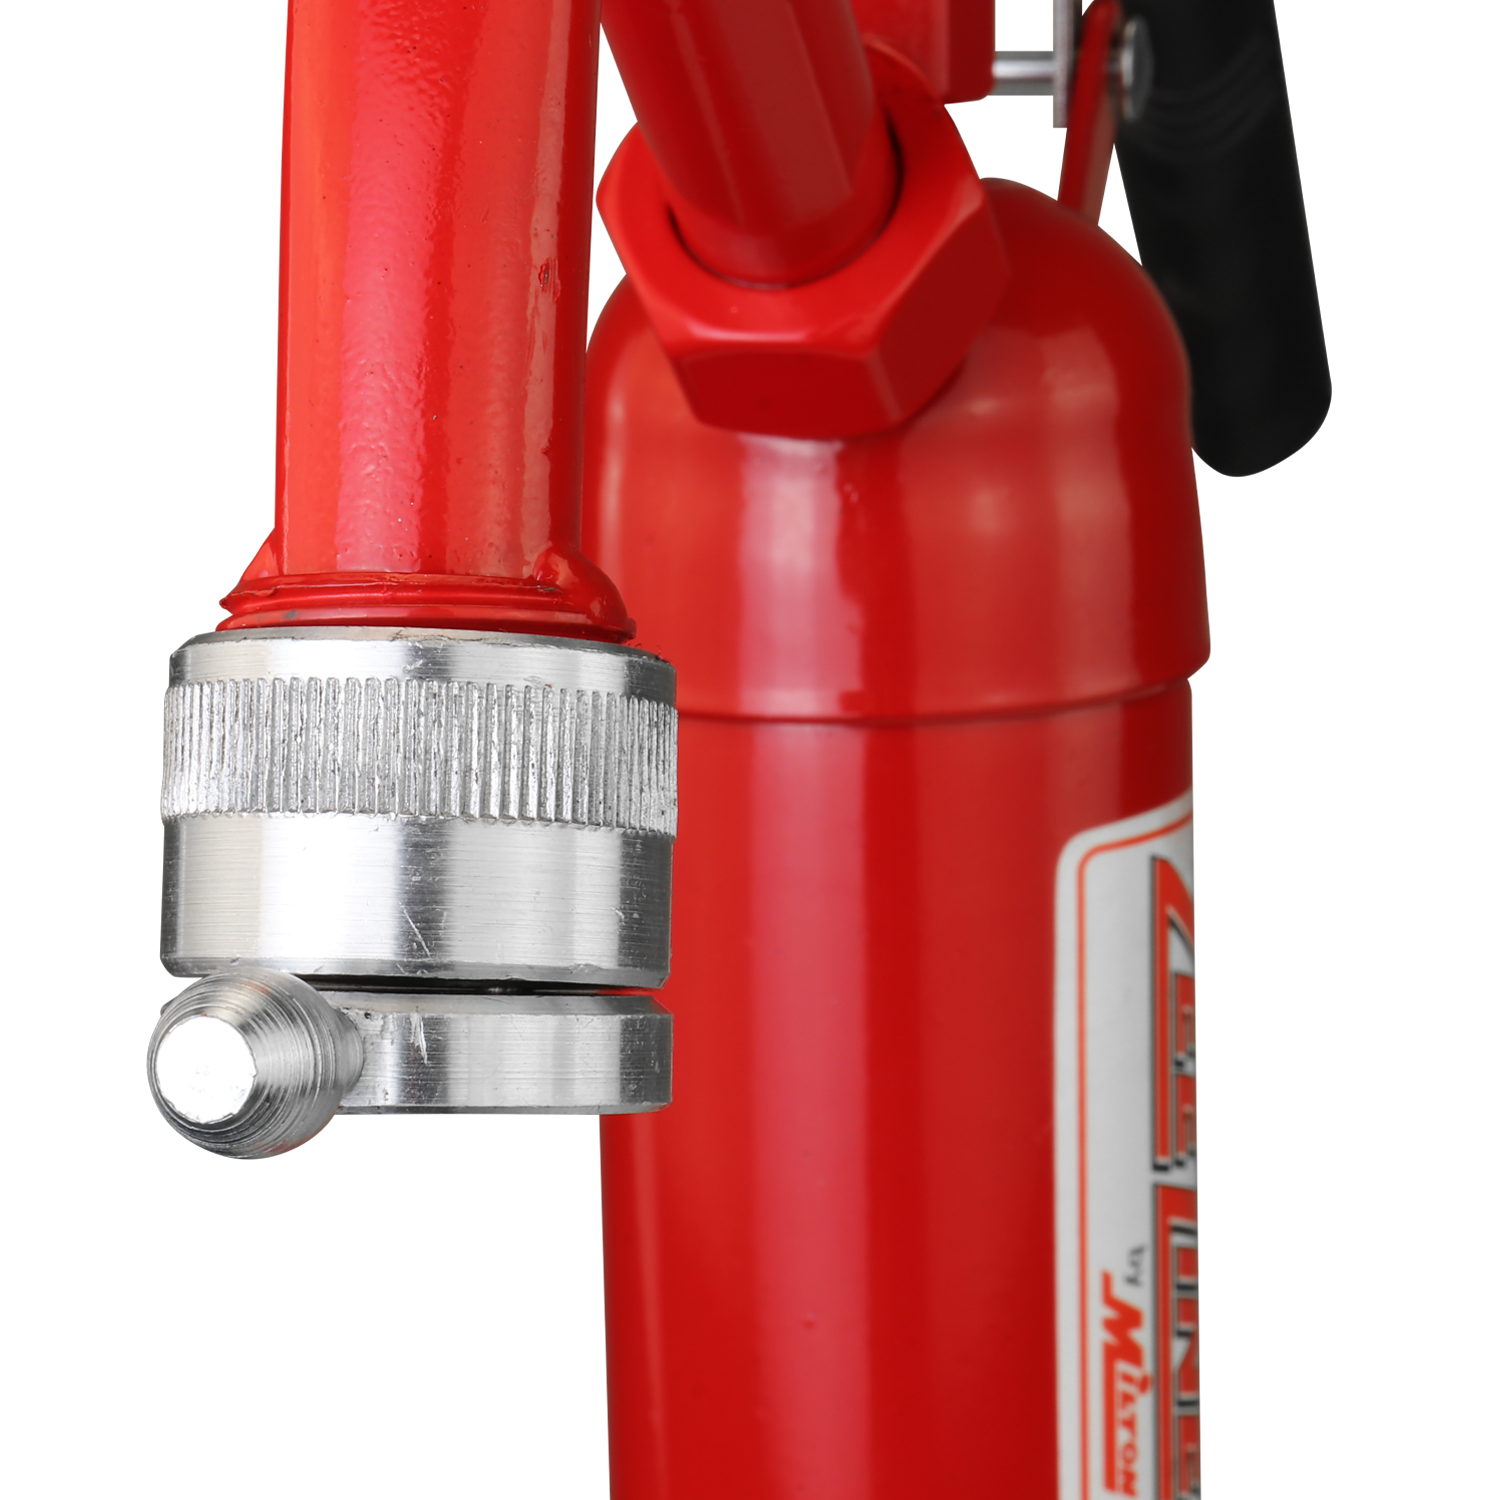 ZED-S1 - Hand Operated Lever Drum Pump, All Steel Body with Non-Drip Spout (1 Gallon Per 9 Strokes)